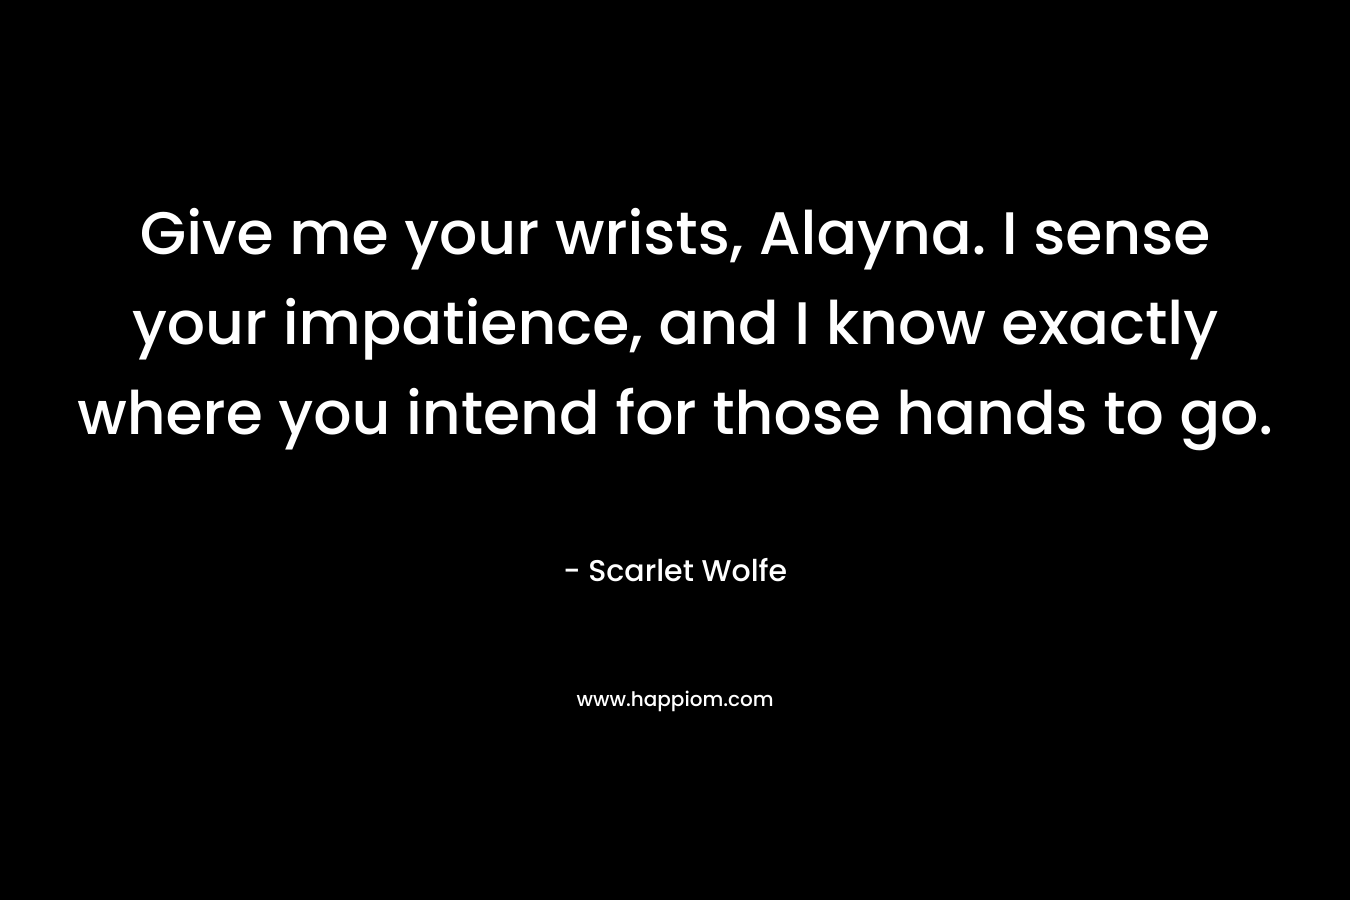 Give me your wrists, Alayna. I sense your impatience, and I know exactly where you intend for those hands to go.